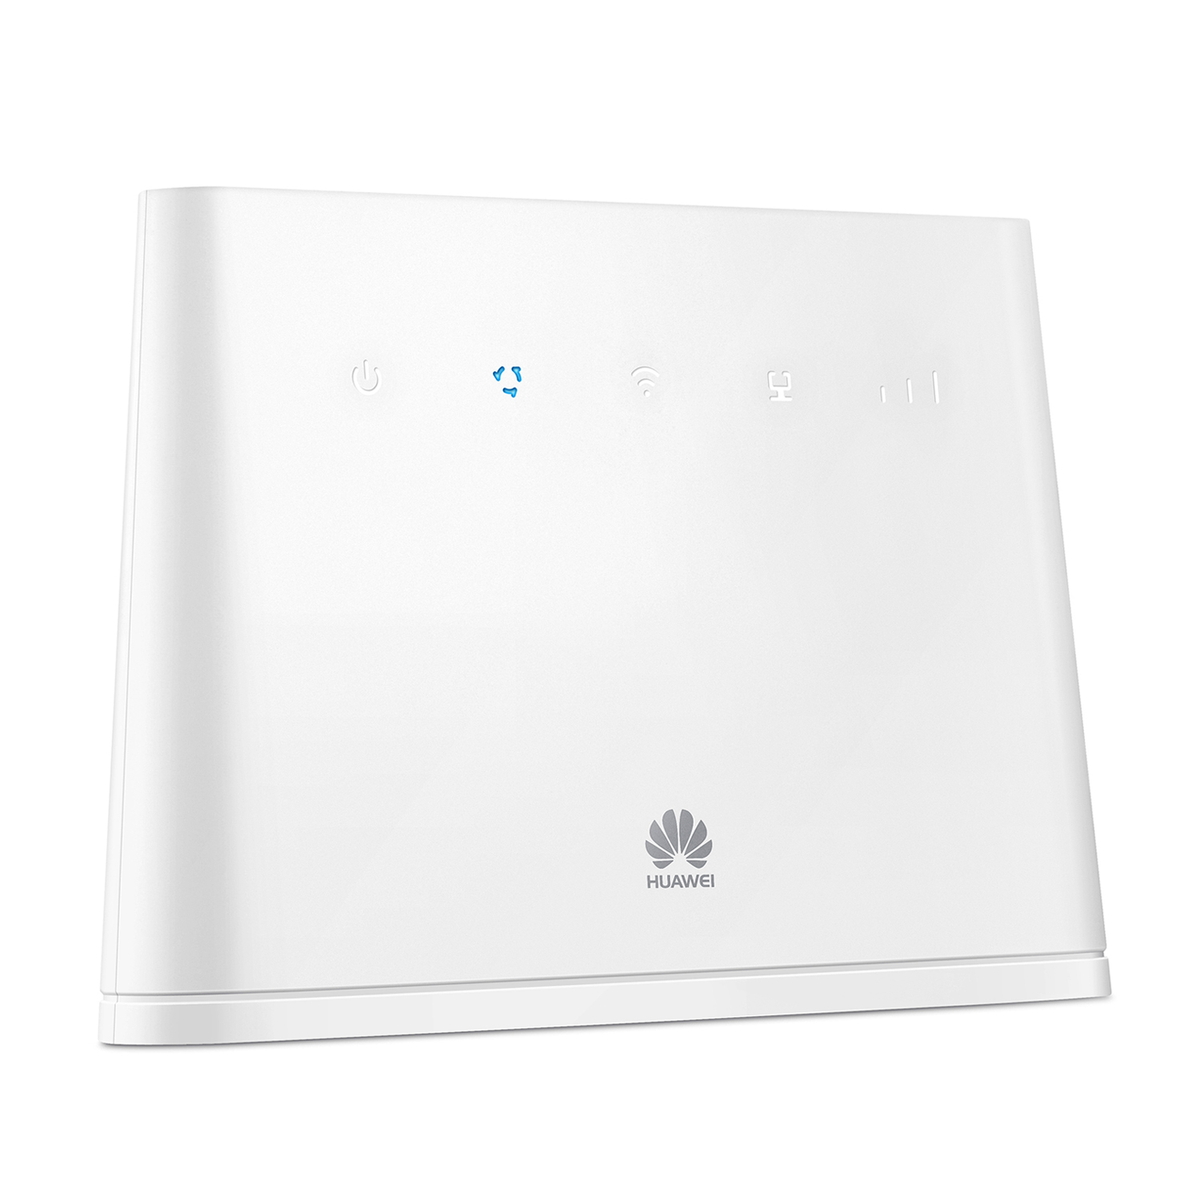 HUAWEI B311S-221 STAT WHITE 4G 150MBPS ROUTER LTE DL Mbit/s CAT4 Router 150